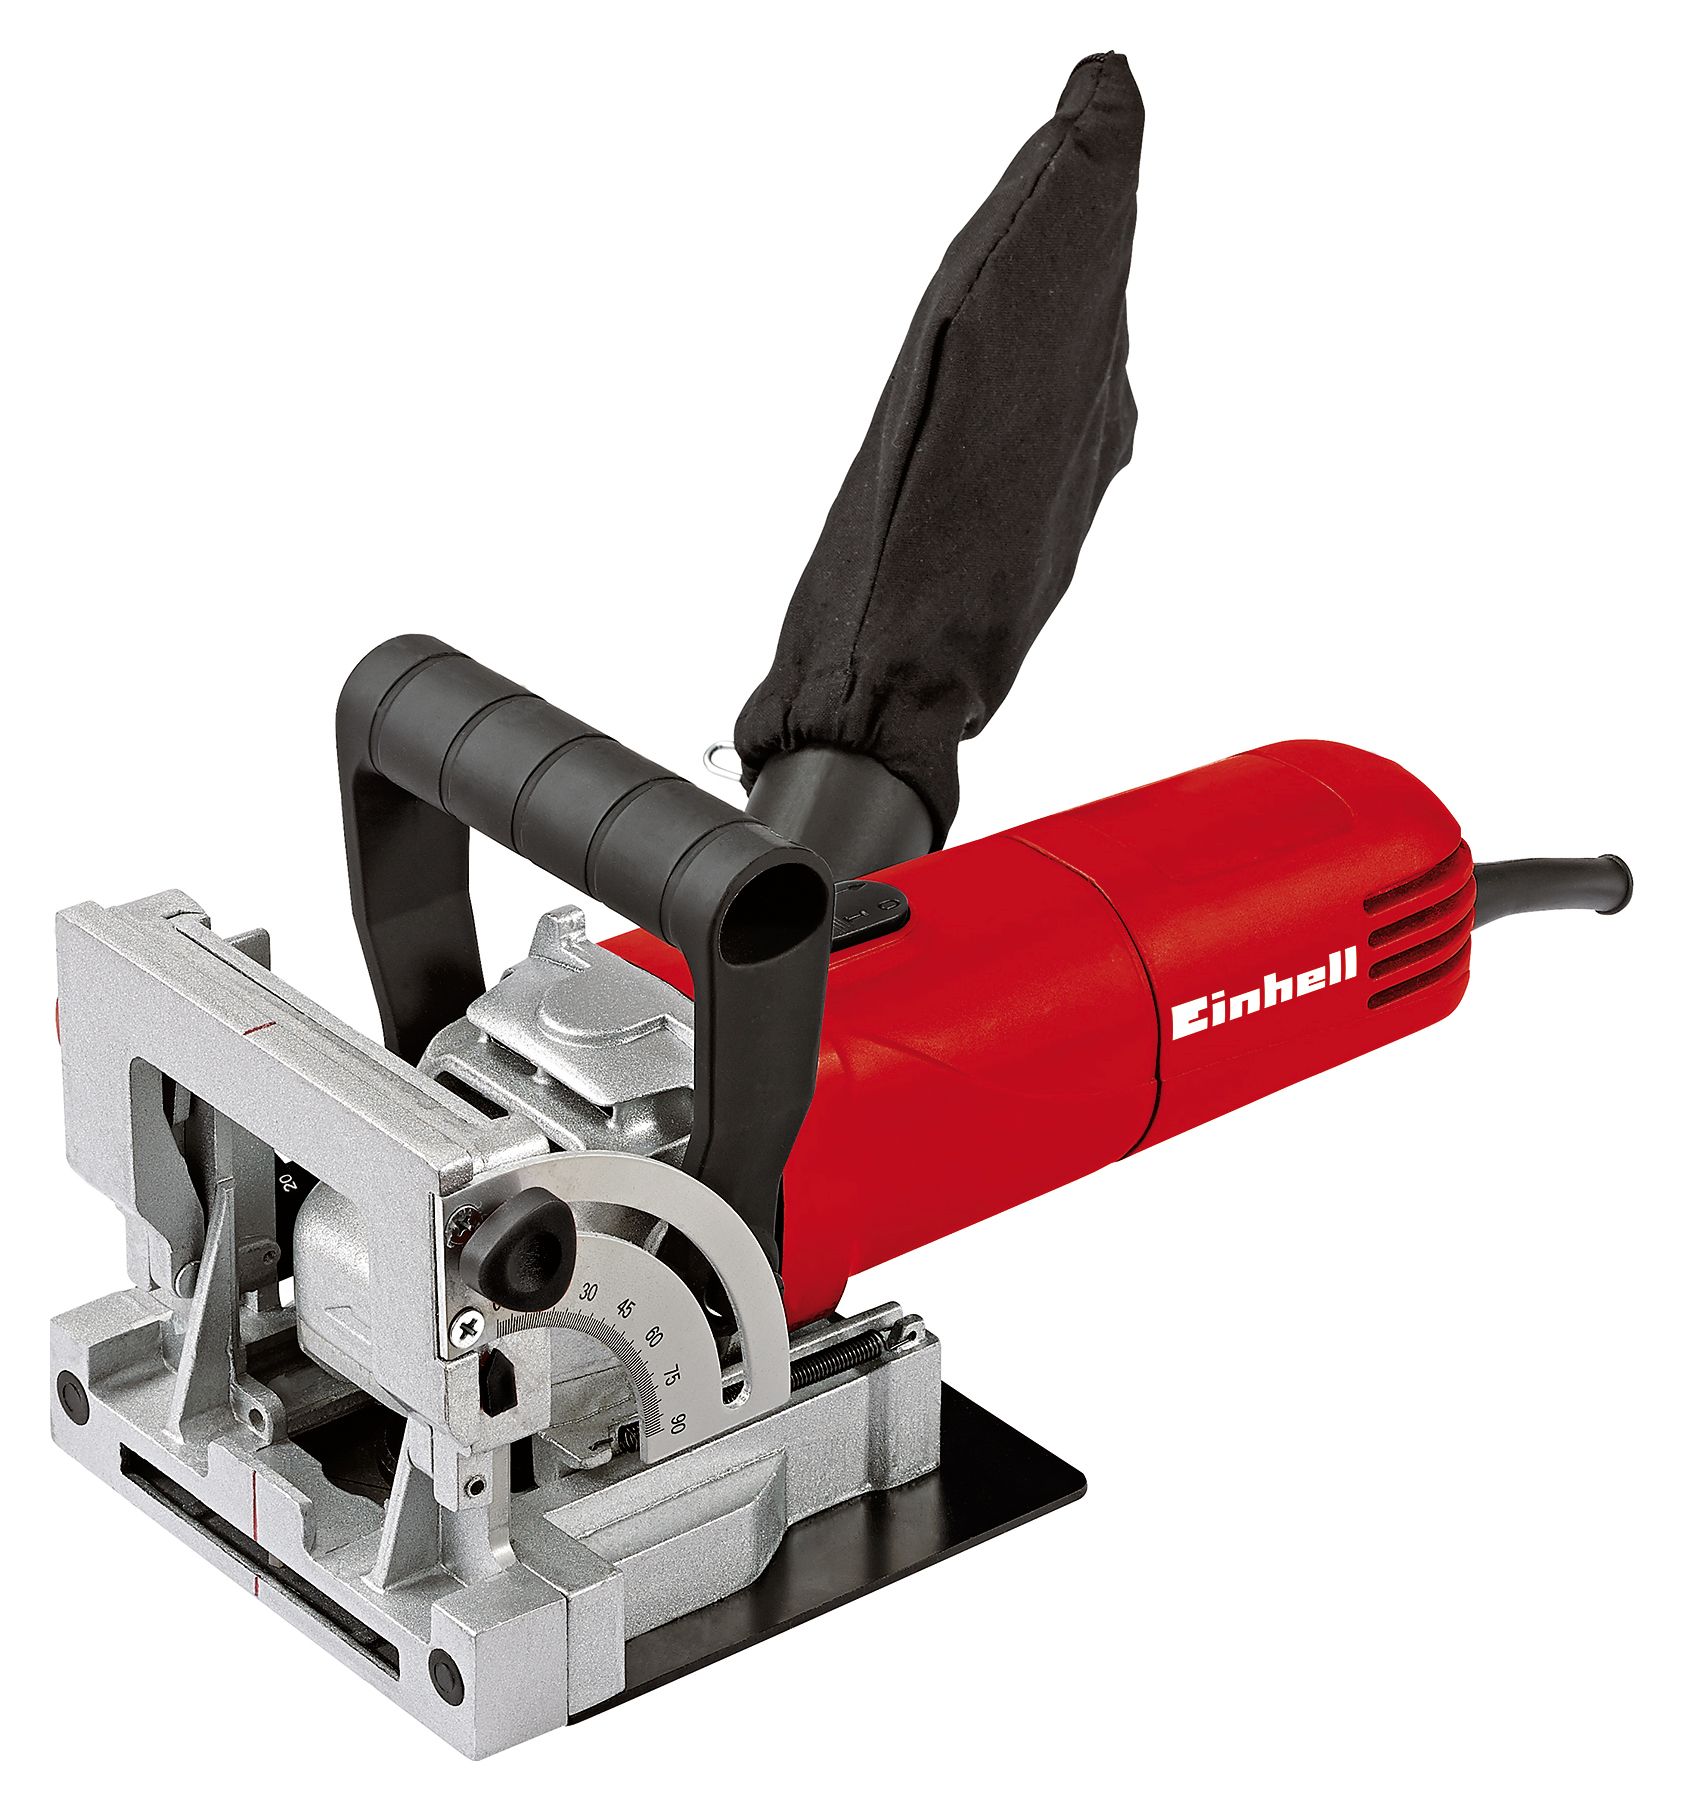 Image of Einhell TC-BJ 900 Corded Biscuit Jointer - 860W